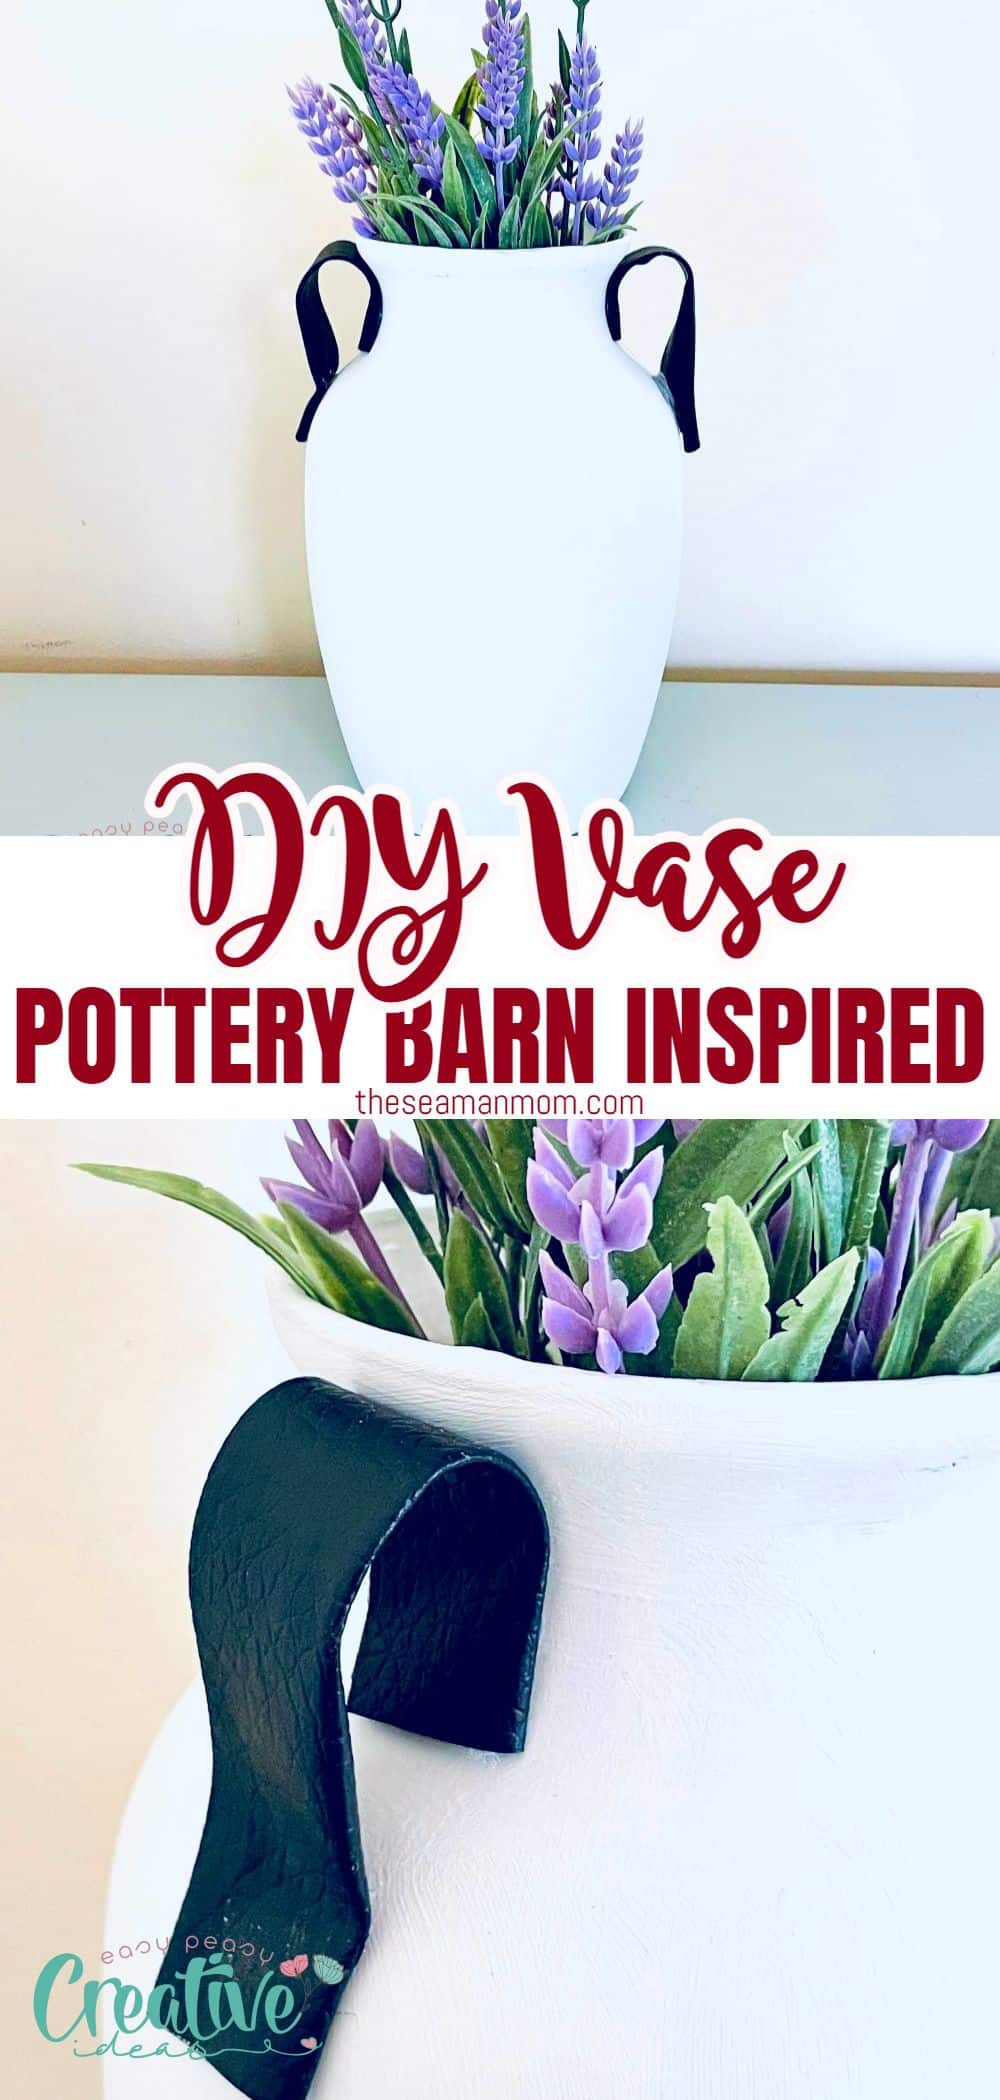 Making your own vase is a great way to add a personal touch to your home décor. And, it's easier than you might think! With just a few supplies from the dollar store, you can create a Pottery Barn-inspired vase in no time. So, what are you waiting for? Grab some supplies and get started on your very own DIY vase today! via @petroneagu